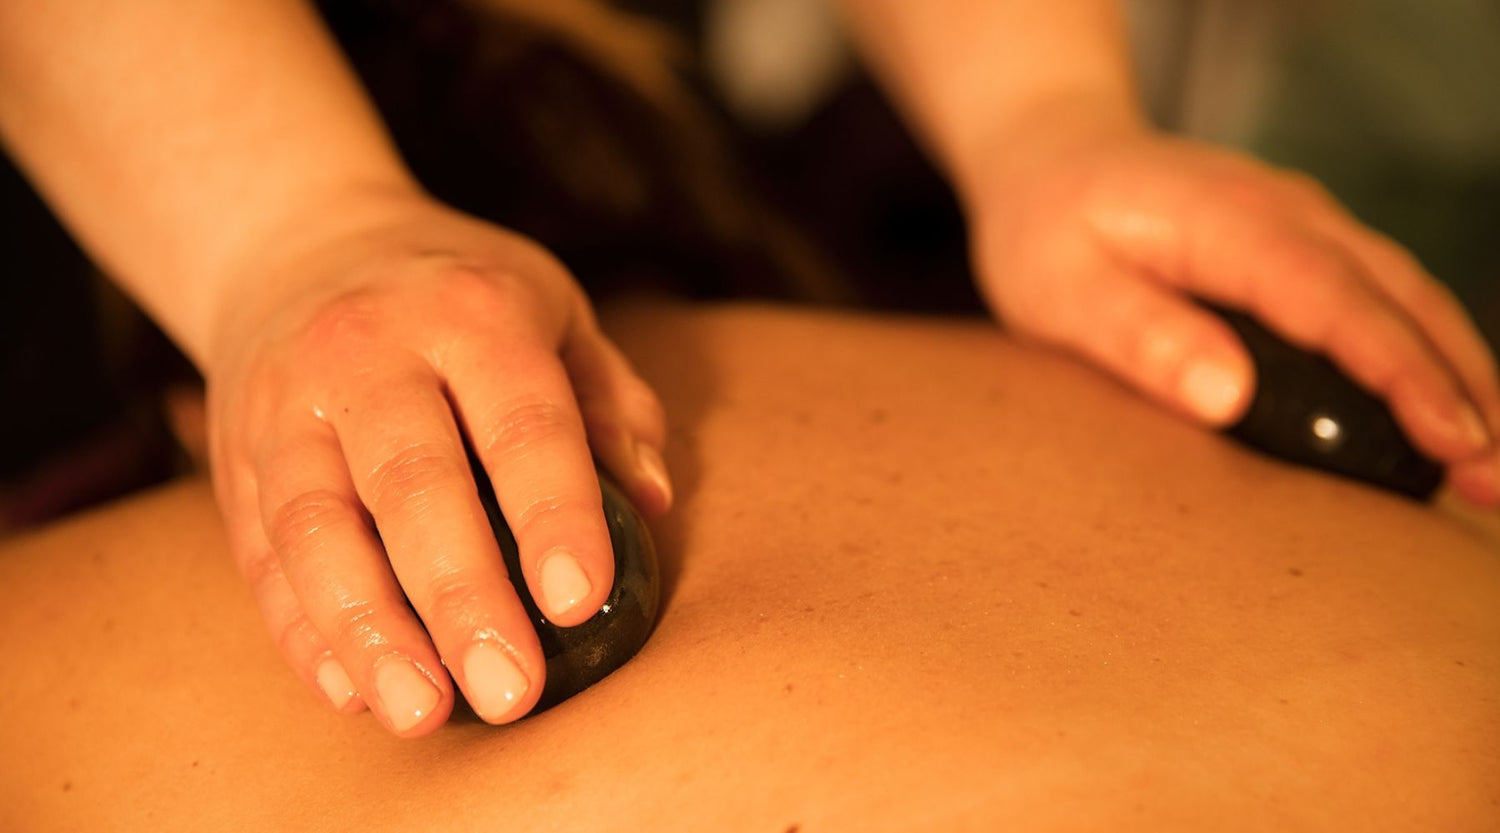 soothing-hot-stone-massage-therapy-for-tension-release-harborough